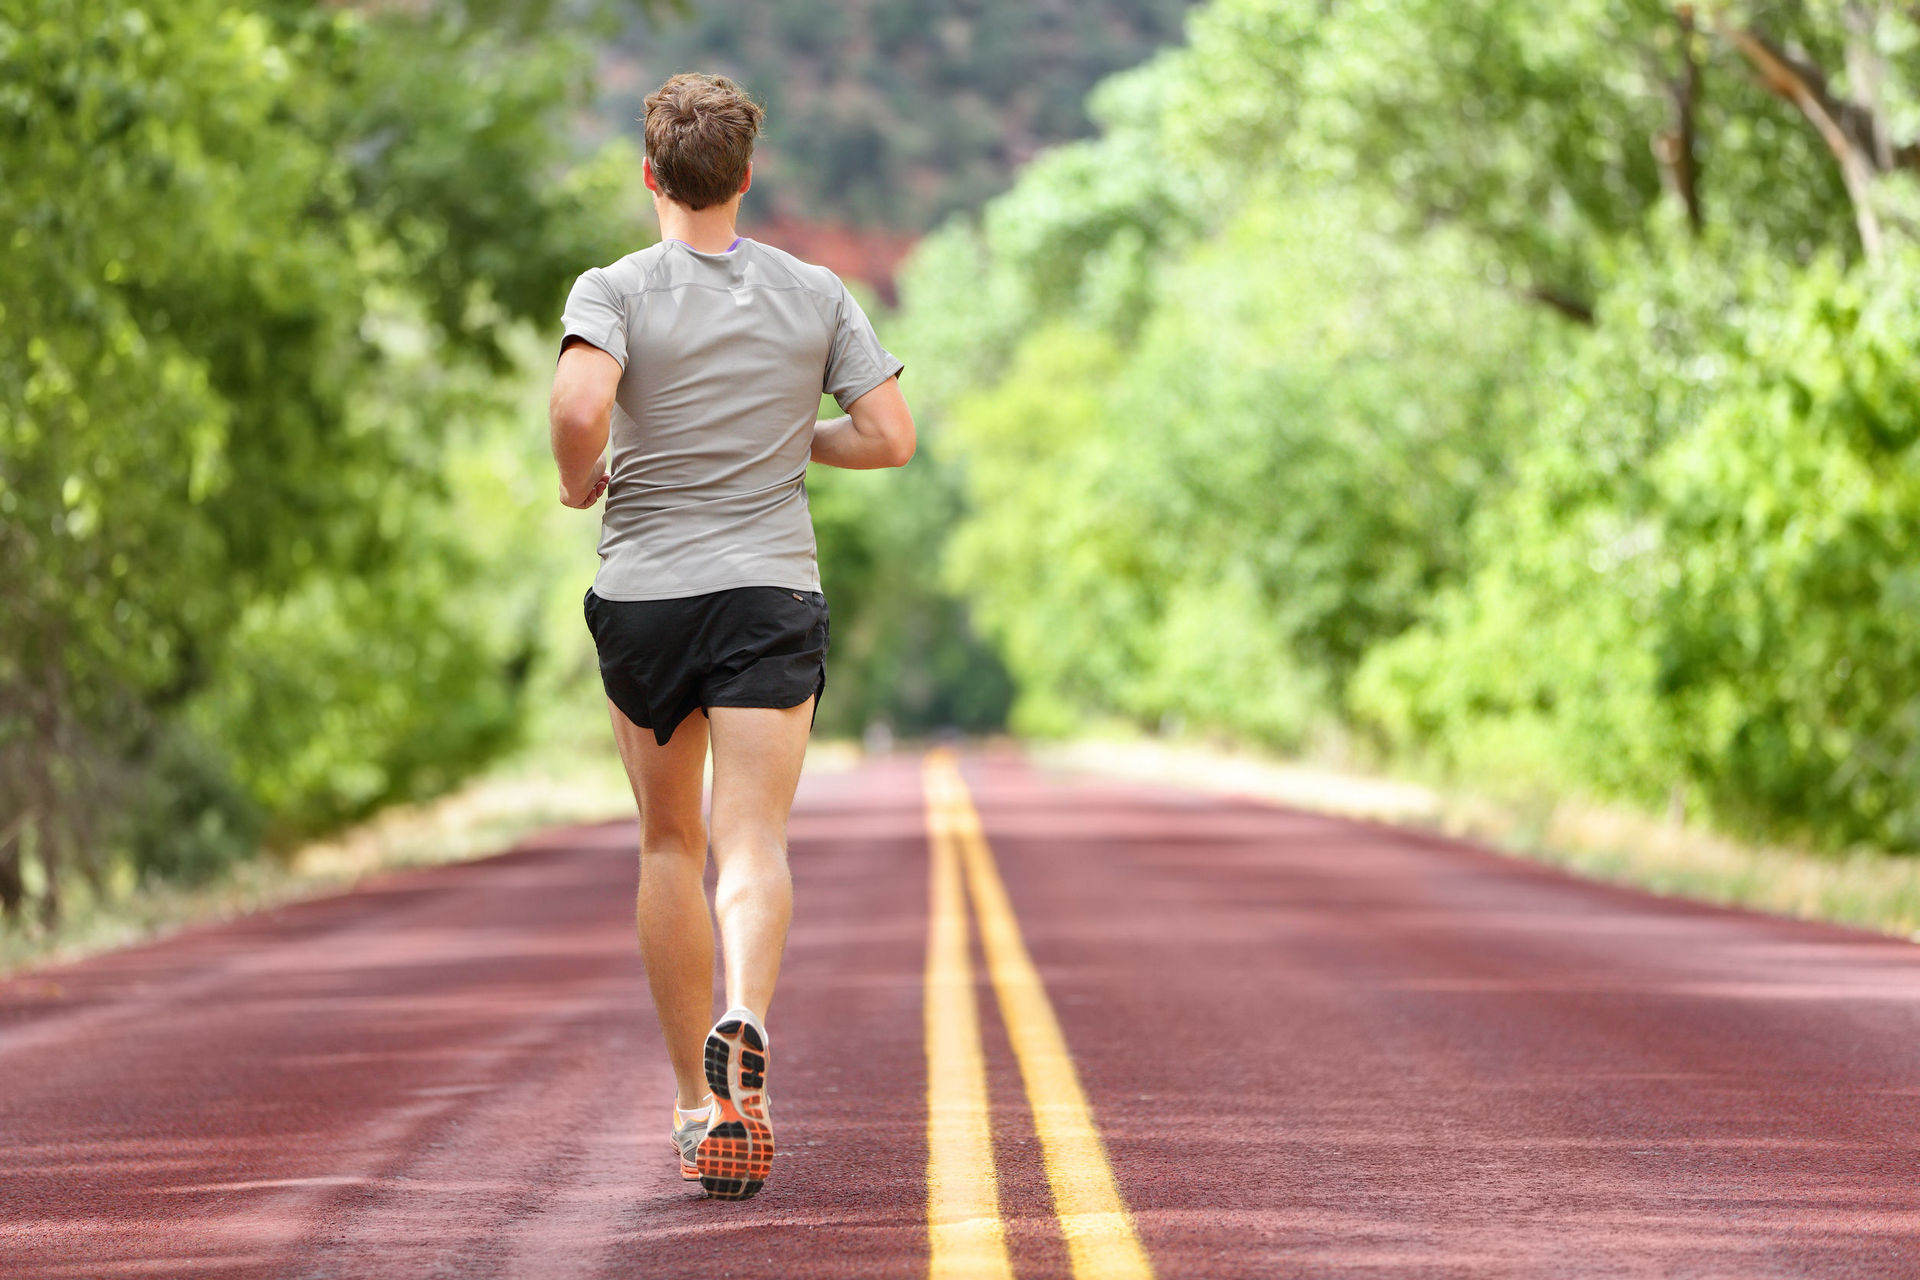 You use 200 muscles to take your first step into running